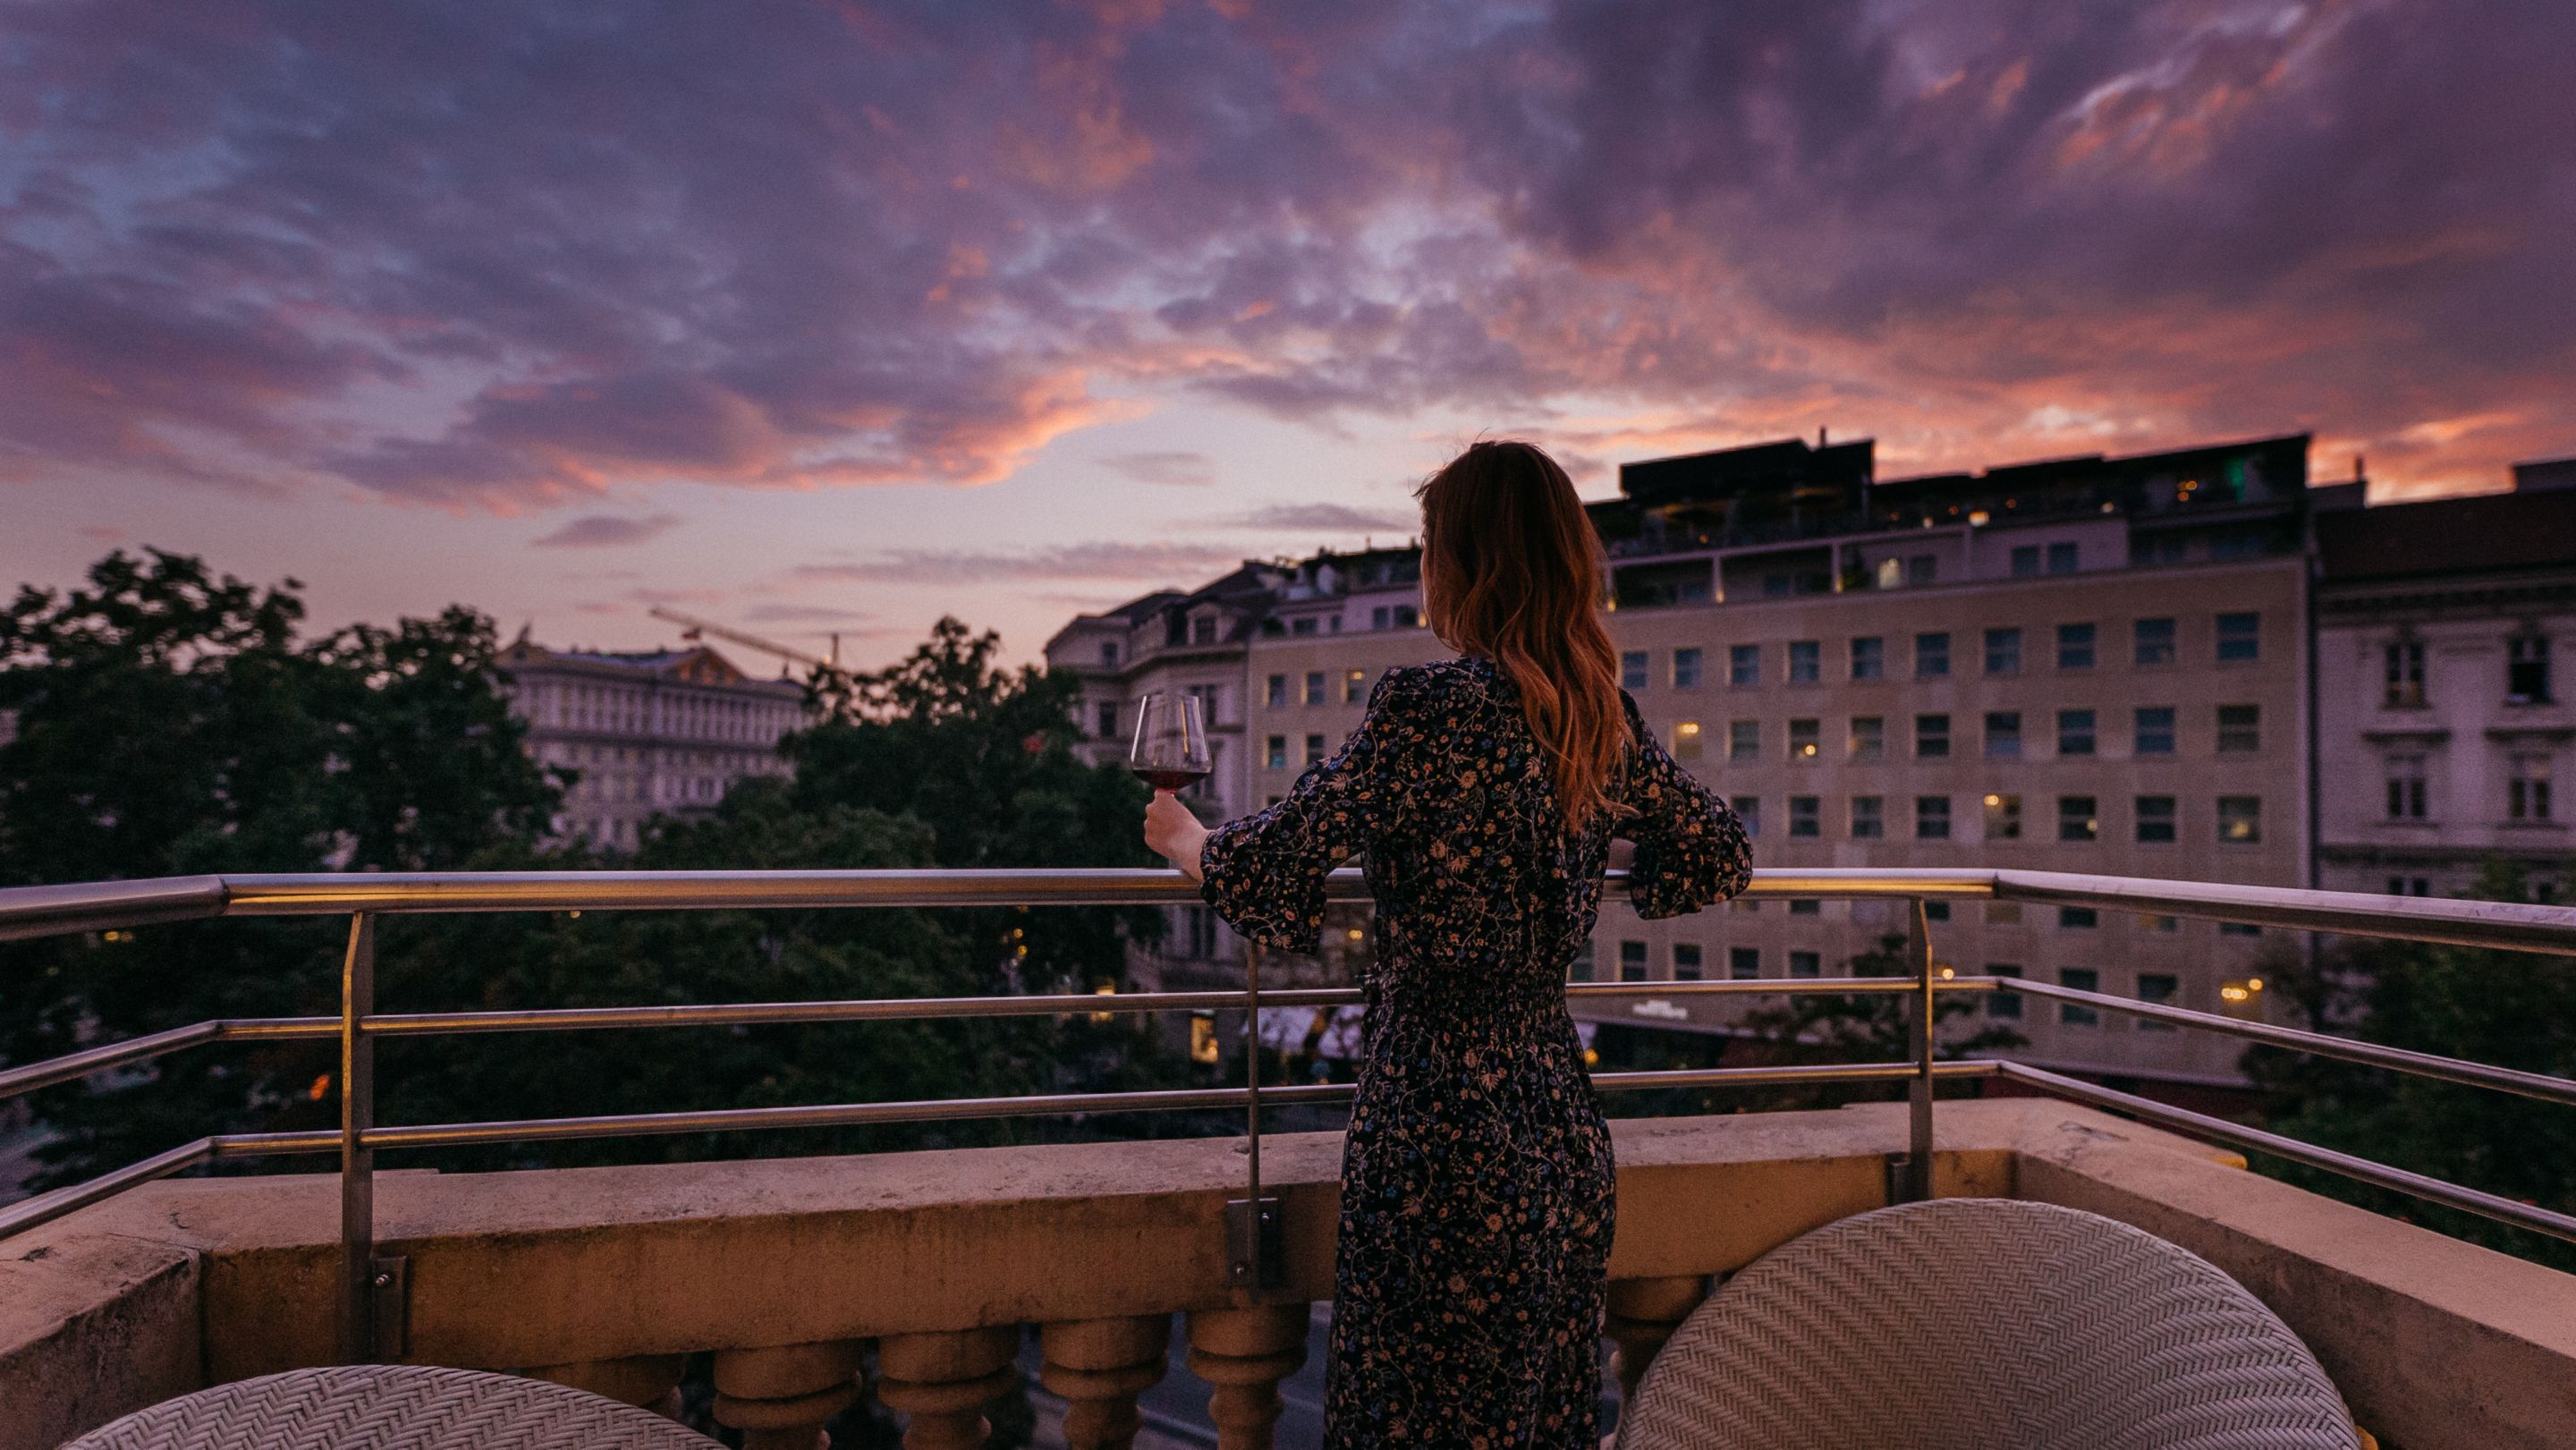 A woman standing on a balcony, enjoying the city view and a scenic sunset.